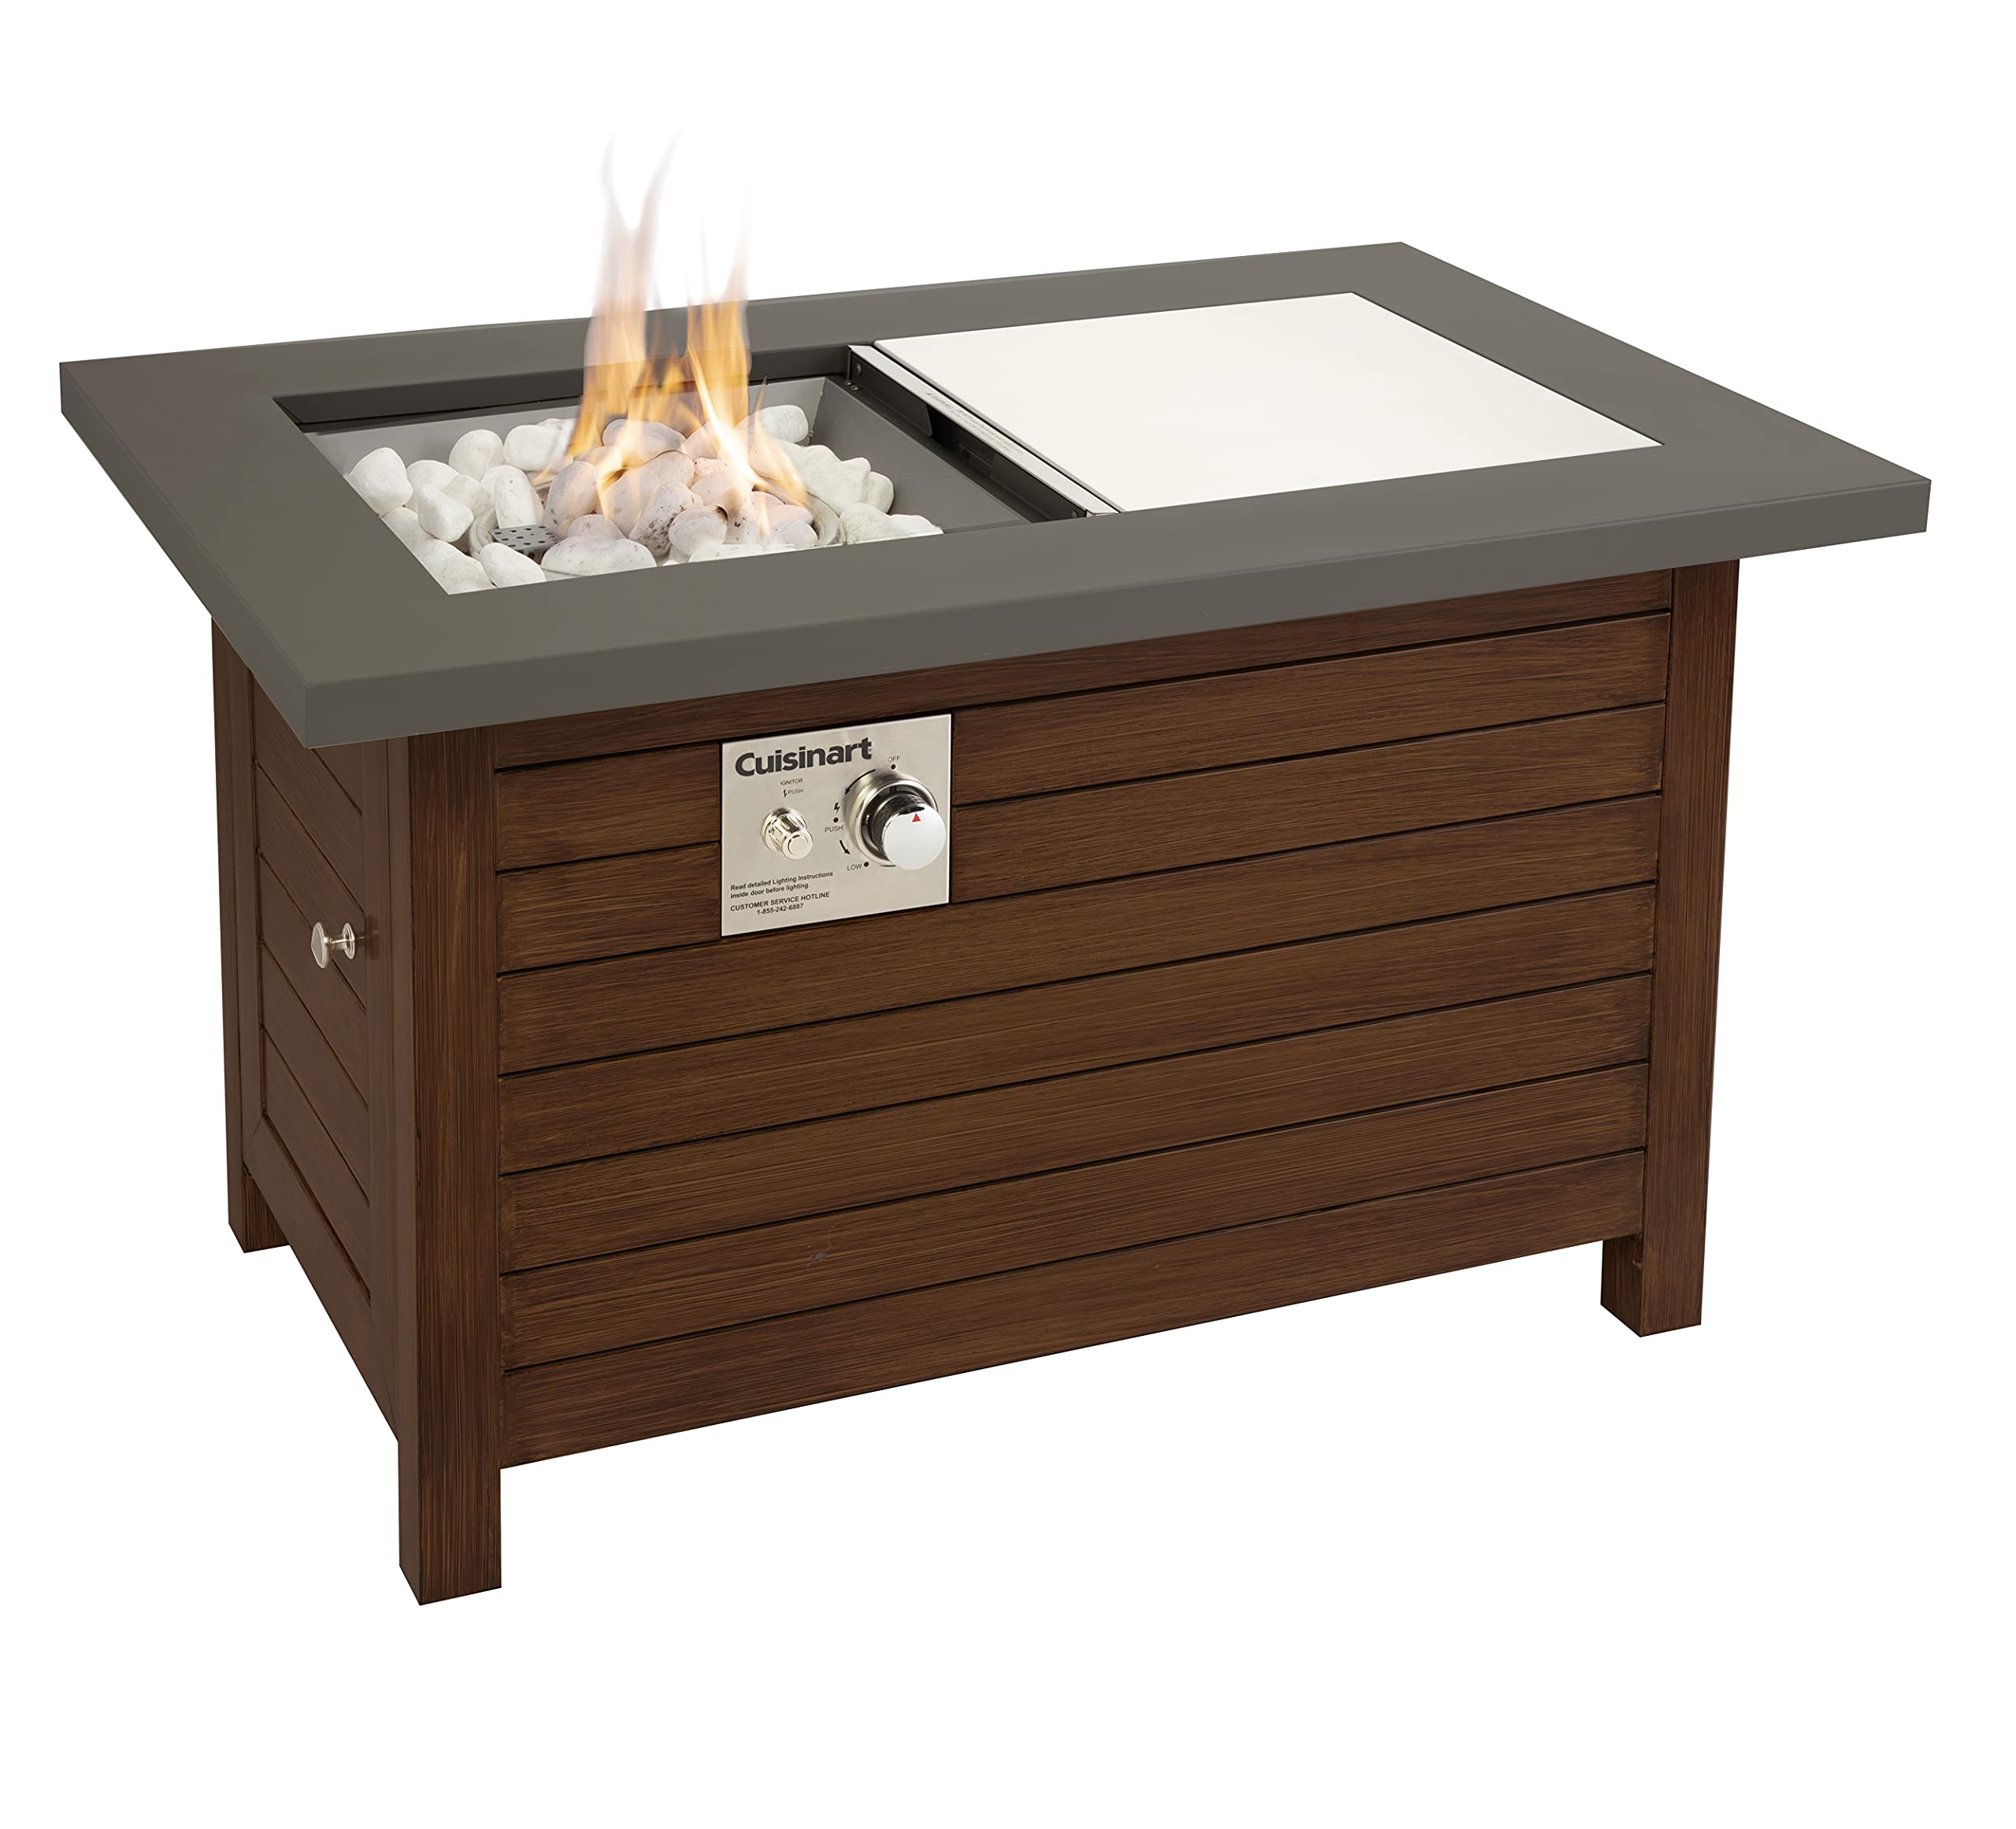 Cuisinart COH-100 Outdoor Patio Push to Start Ignition, 2-in-1 Design-Fire Pit to Coffee Table, 40,000 BTU Burner